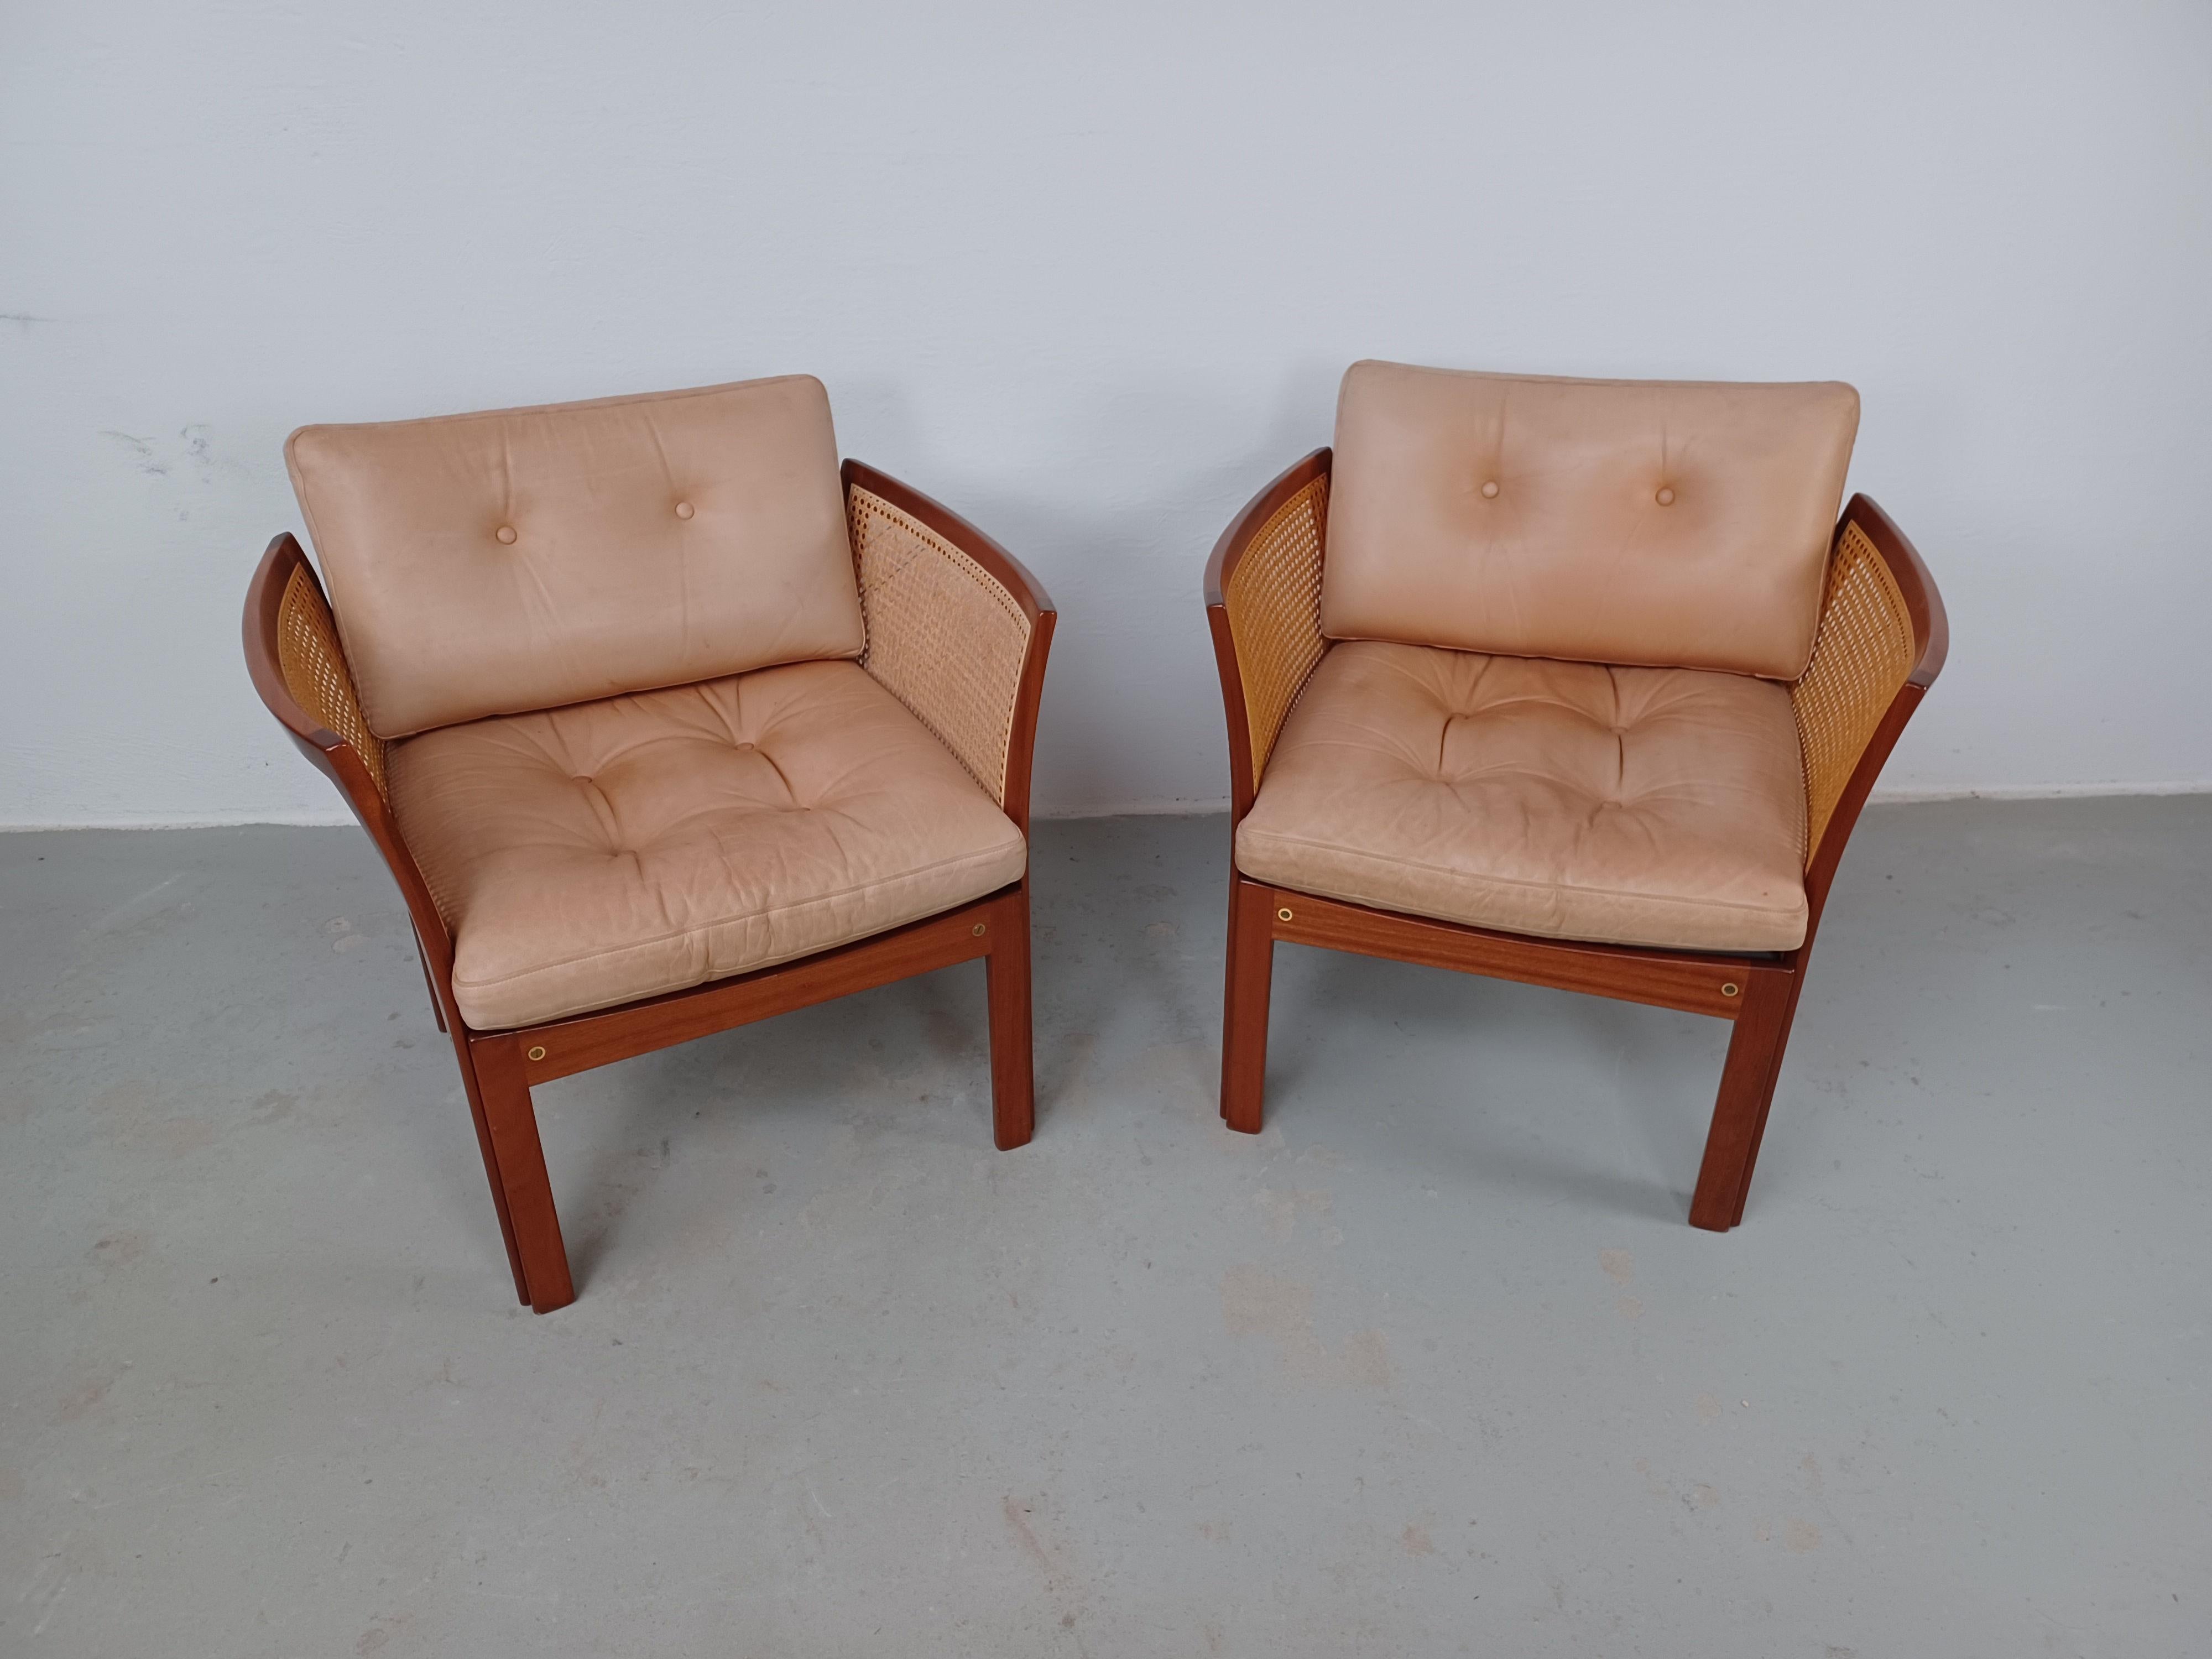 1960s Set of Two Illum Vikkelso Plexus Easy Chairs in Rosewood by CFC Silkeborg

The plexus chair series consisting of a lounge chair, sofa, coffee table and sidetable was designed by Illum Wikkelsø in the 1960s and manufactored by CFC Silkeborg in